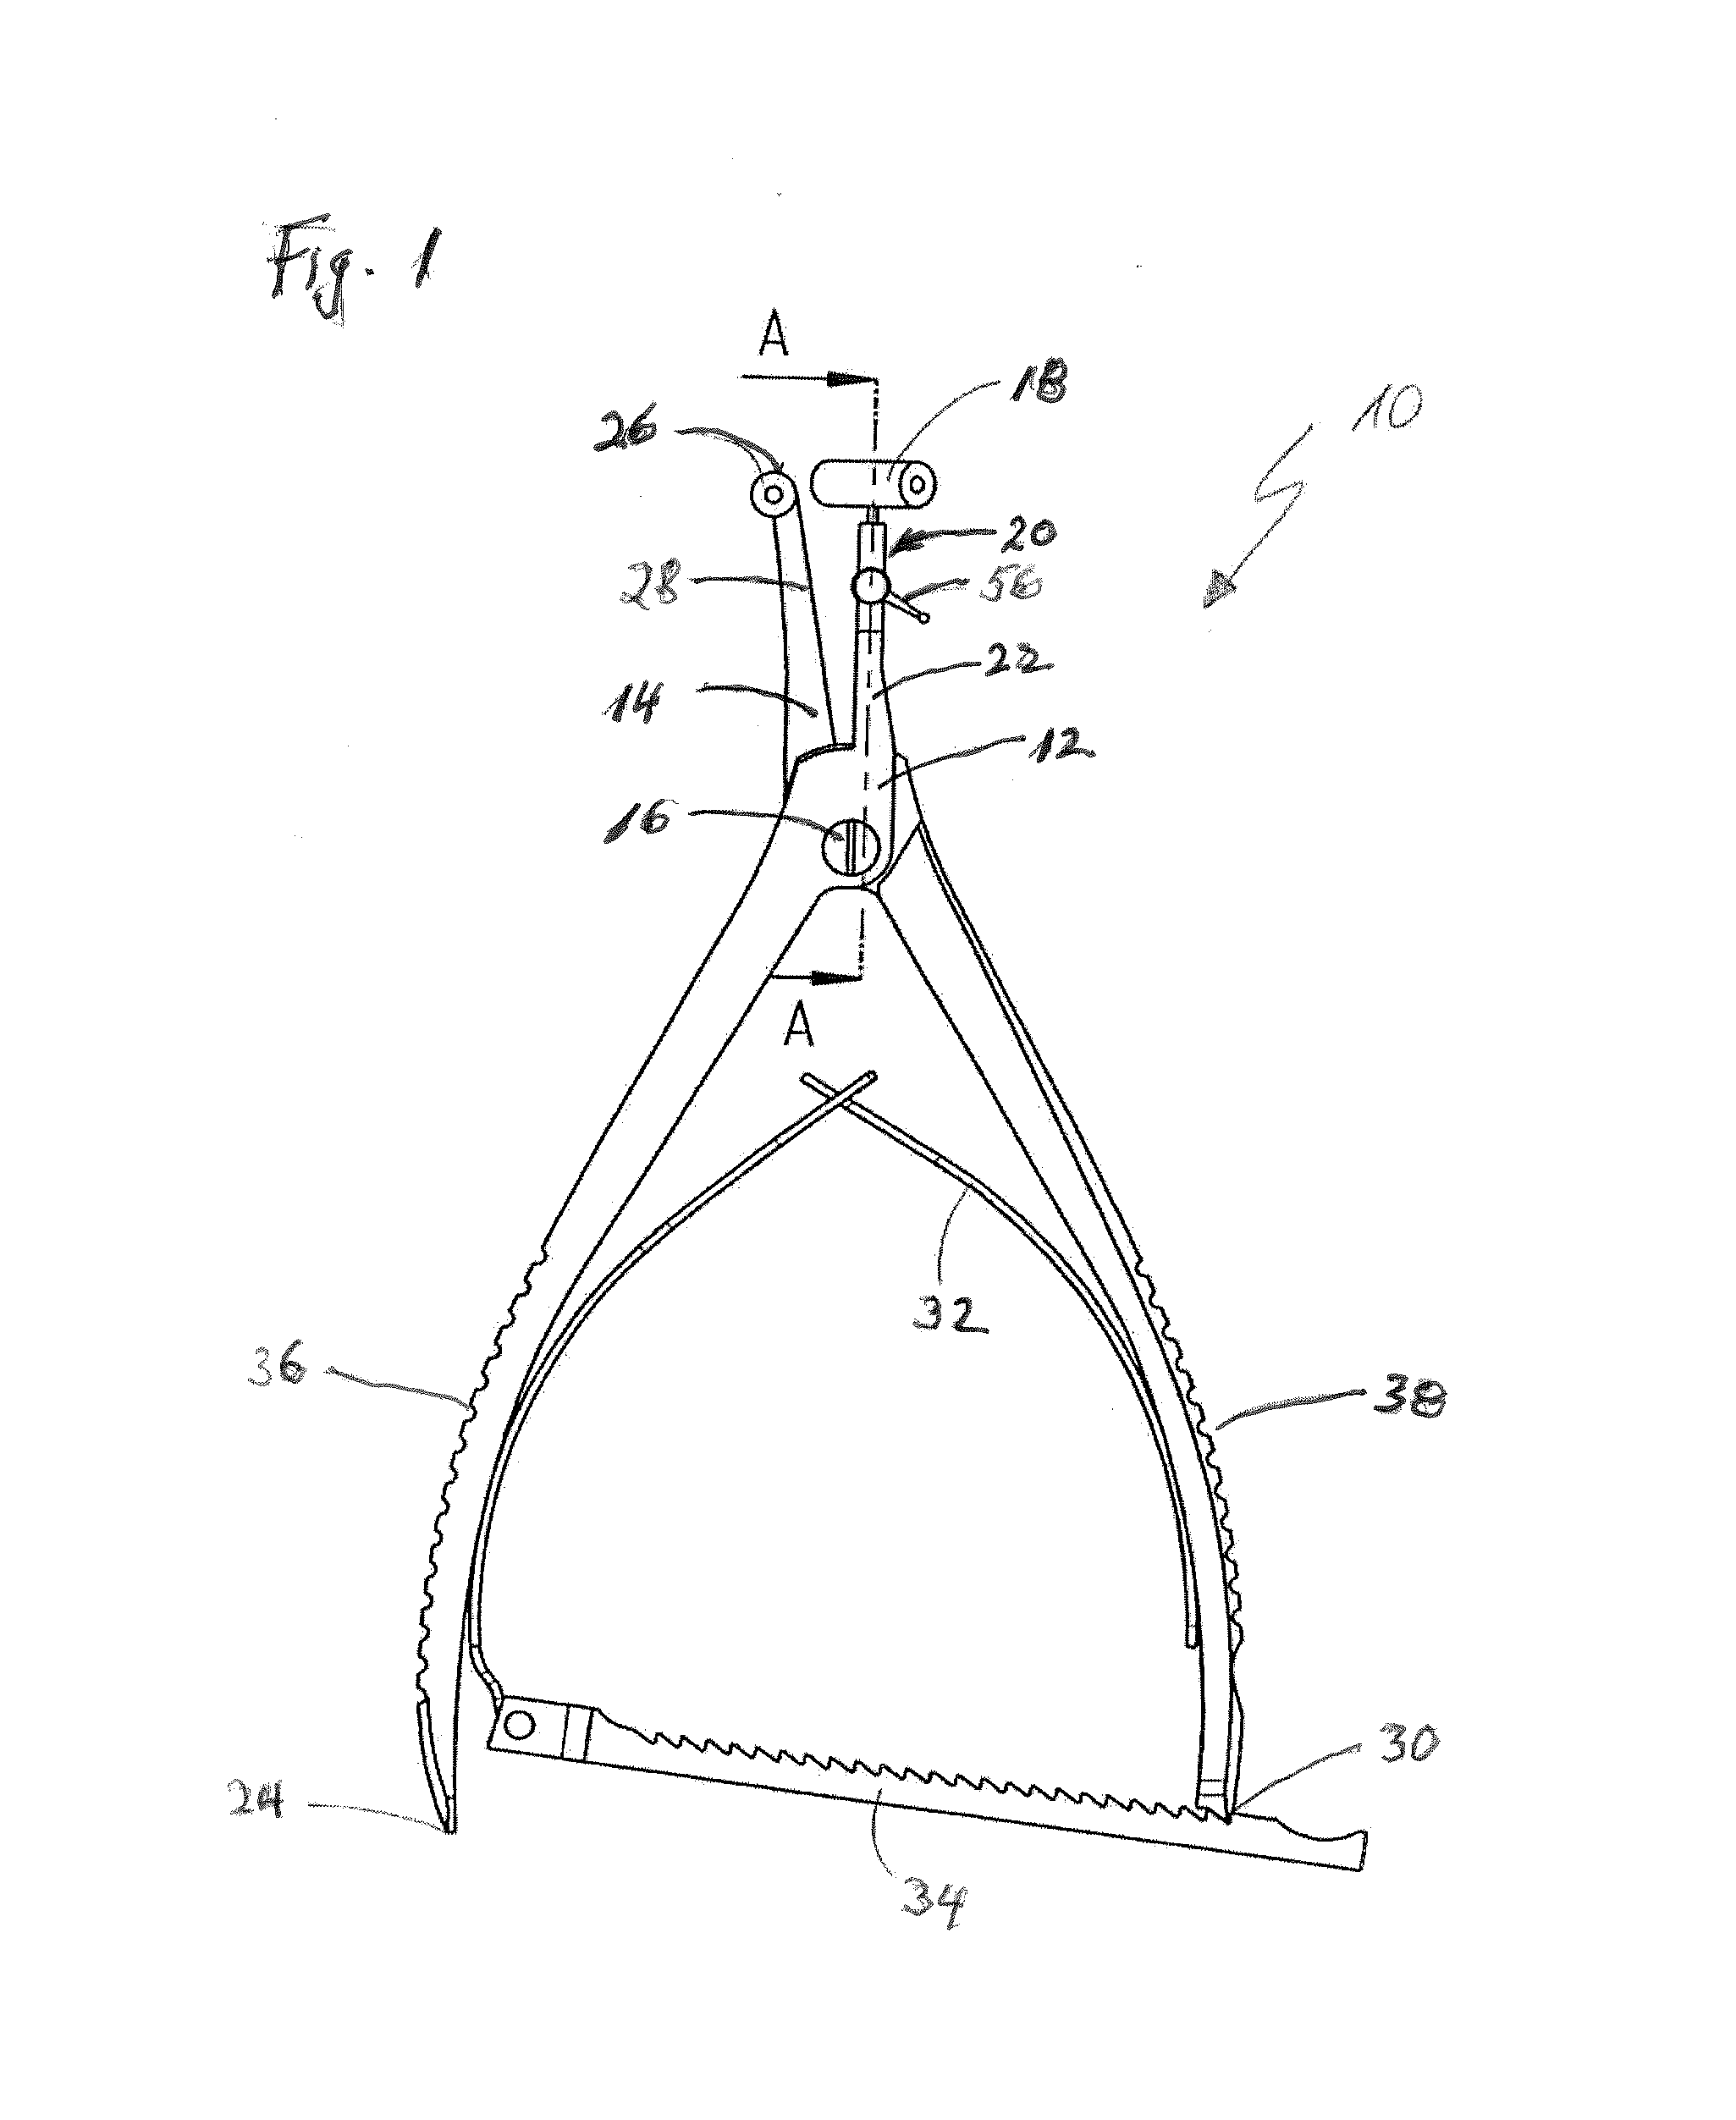 Surgical reduction clamp